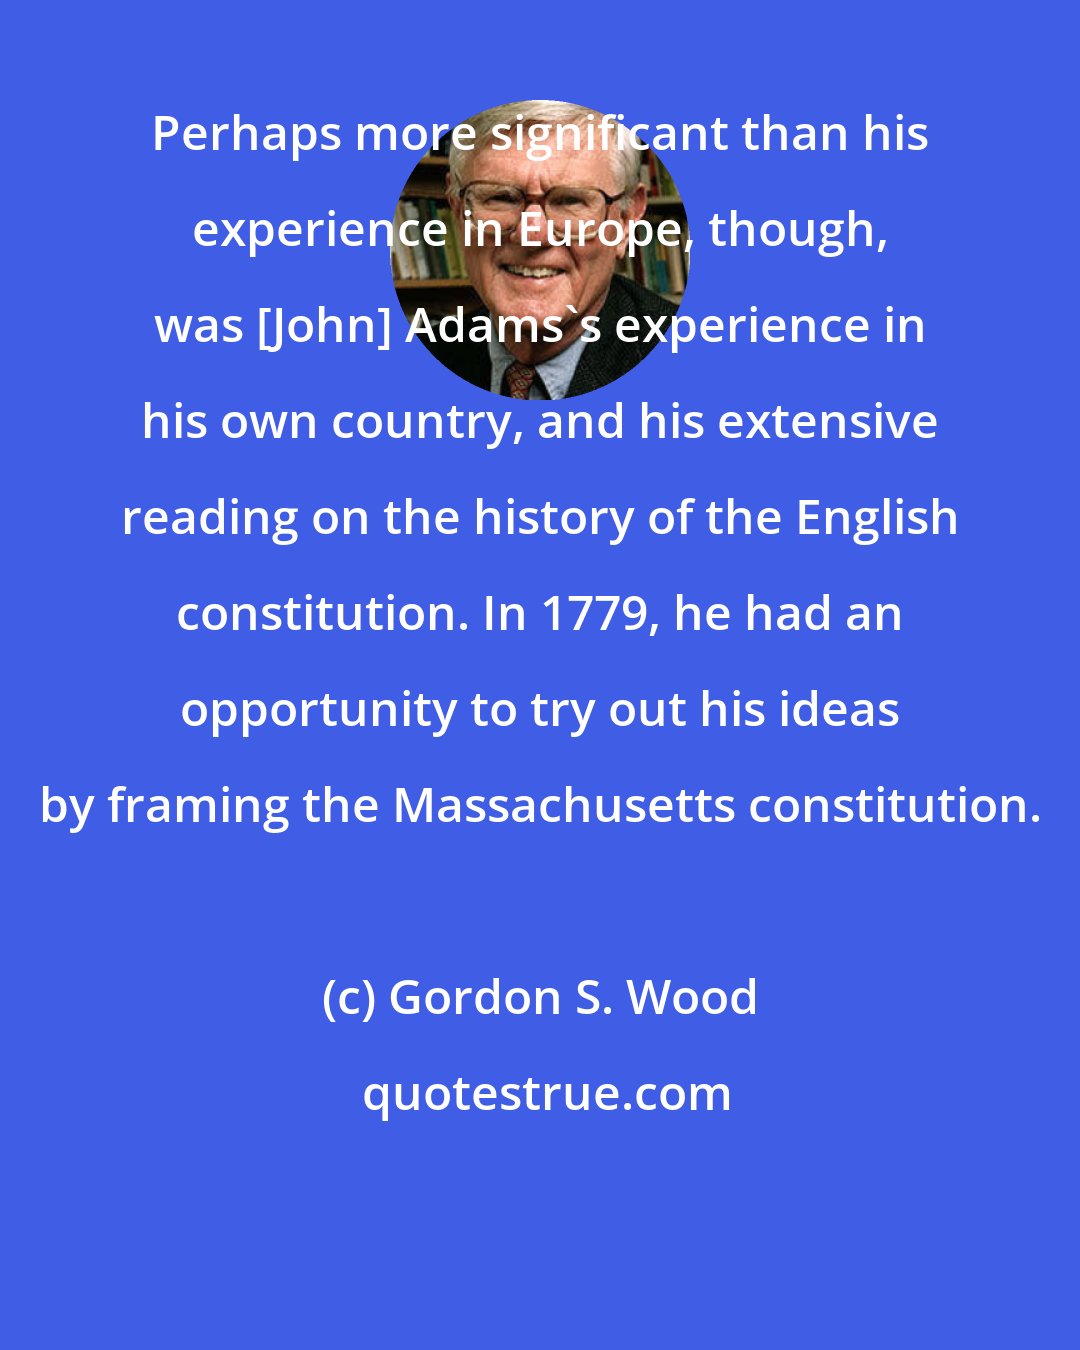 Gordon S. Wood: Perhaps more significant than his experience in Europe, though, was [John] Adams's experience in his own country, and his extensive reading on the history of the English constitution. In 1779, he had an opportunity to try out his ideas by framing the Massachusetts constitution.